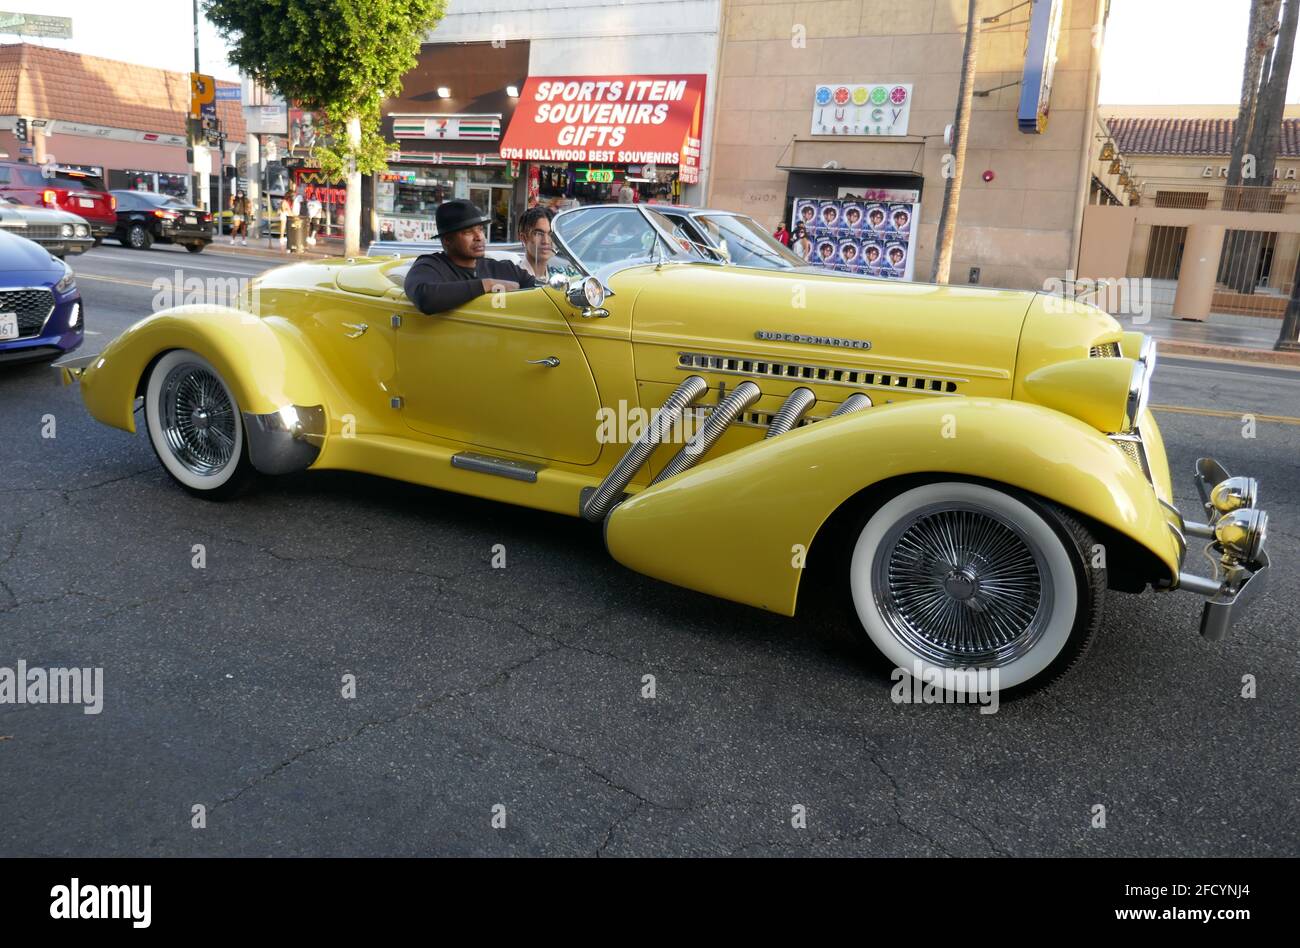 Hollywood, California, USA 17th April 2021 A general view of atmosphere of Car on Hollywood Walk of Fame on April 17, 2021 in Hollywood, California, USA. Photo by Barry King/Alamy Stock Photo Stock Photo